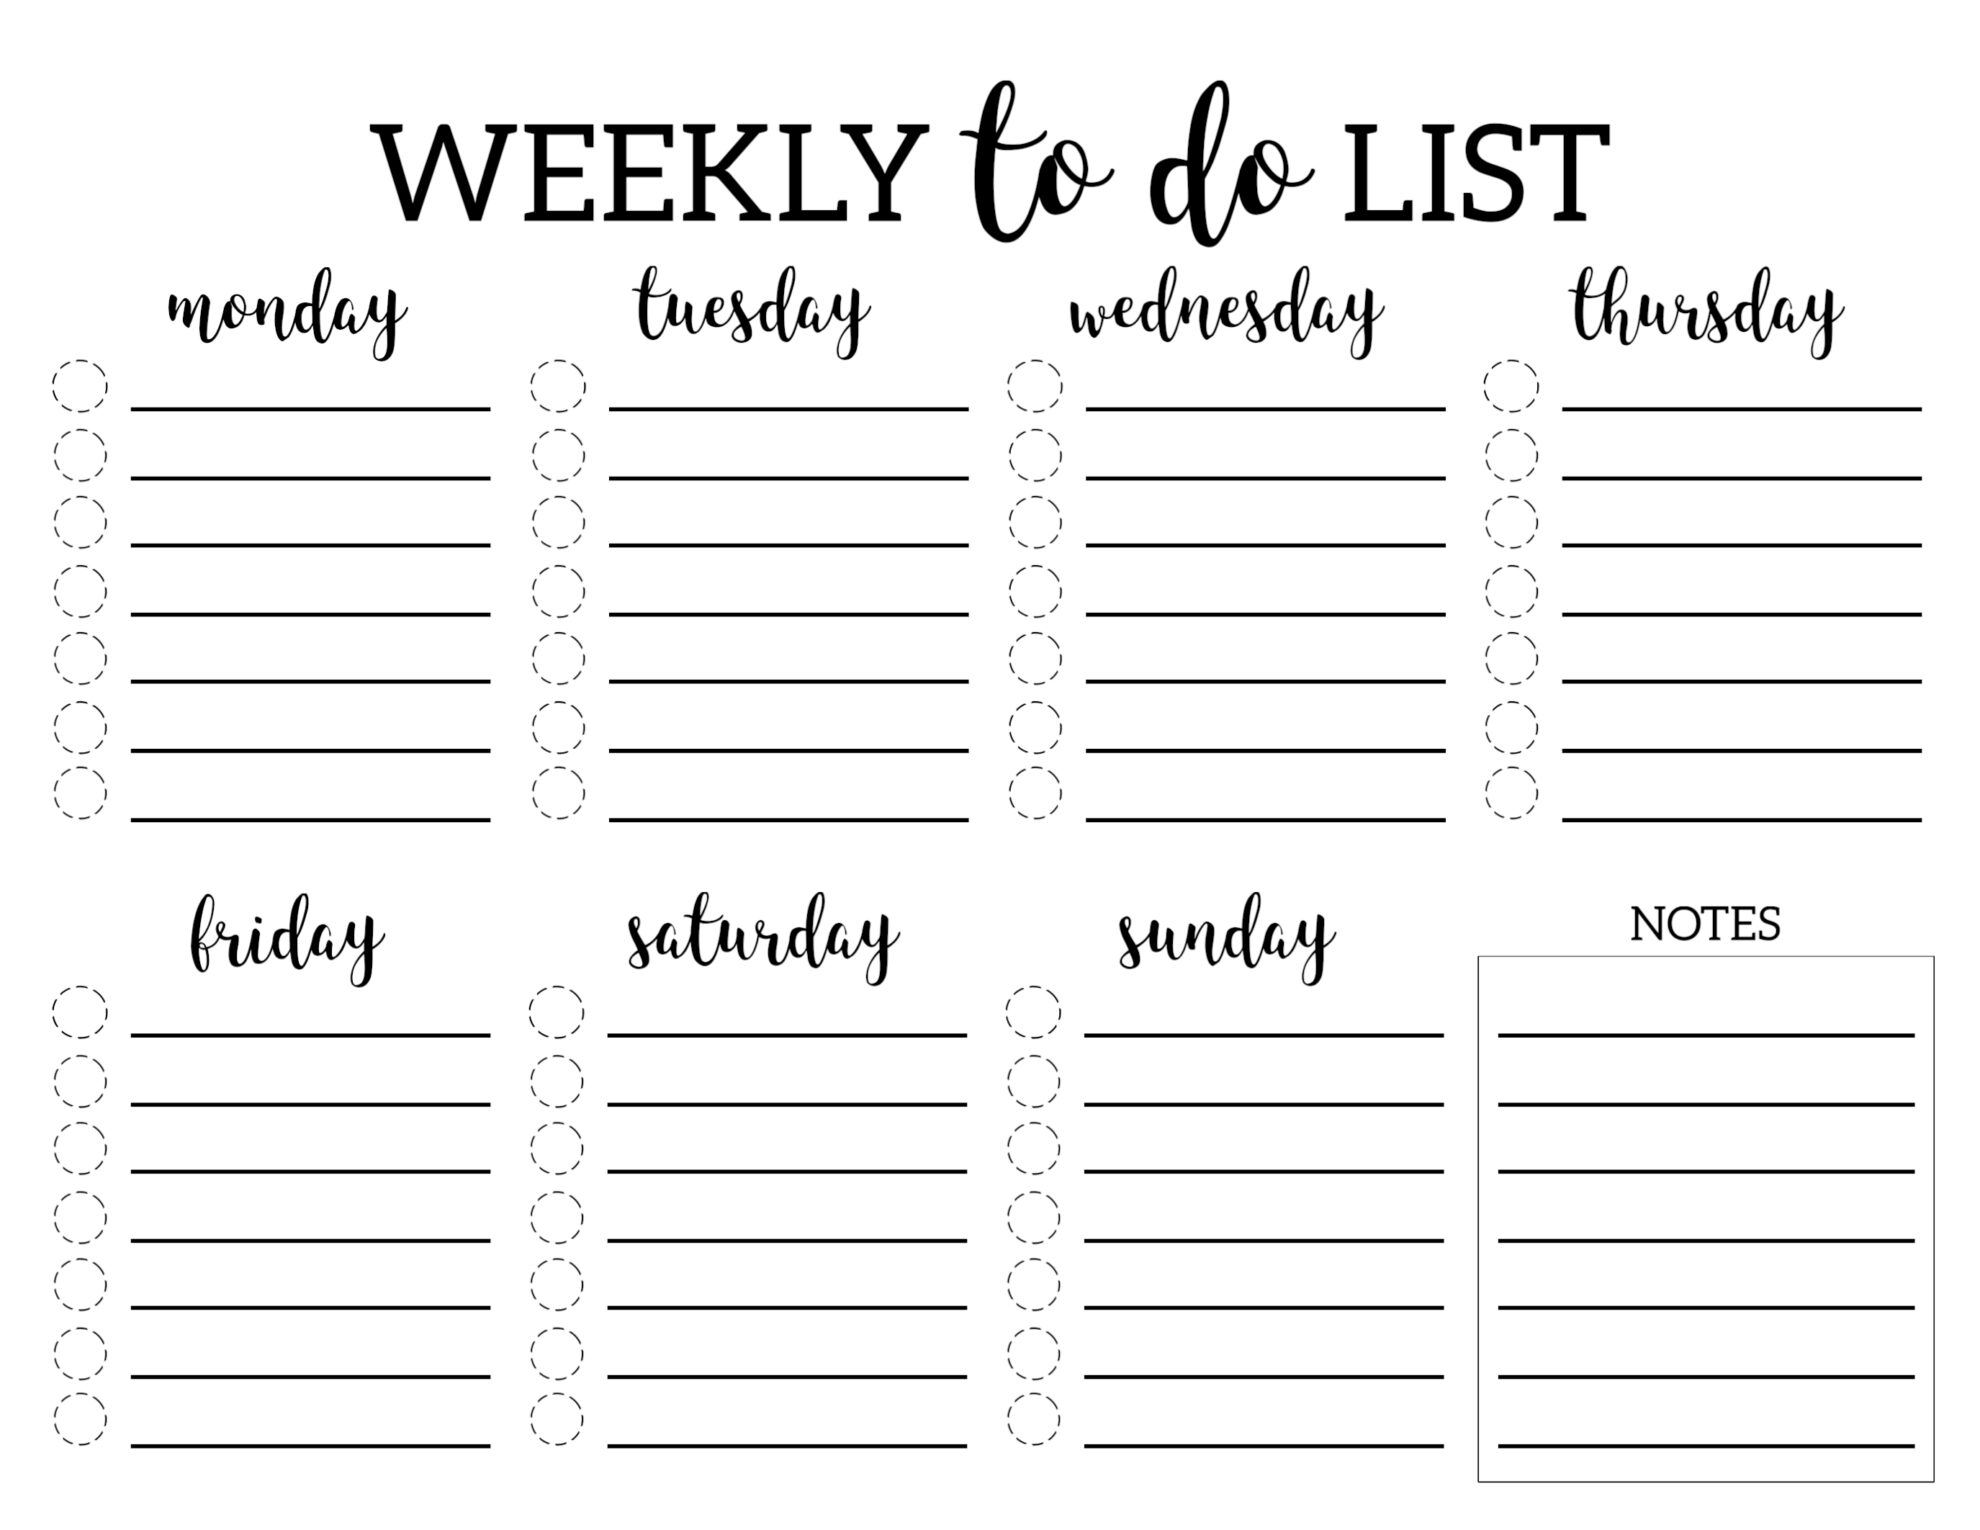 Weekly To Do List Printable Checklist Template | Paper Trail